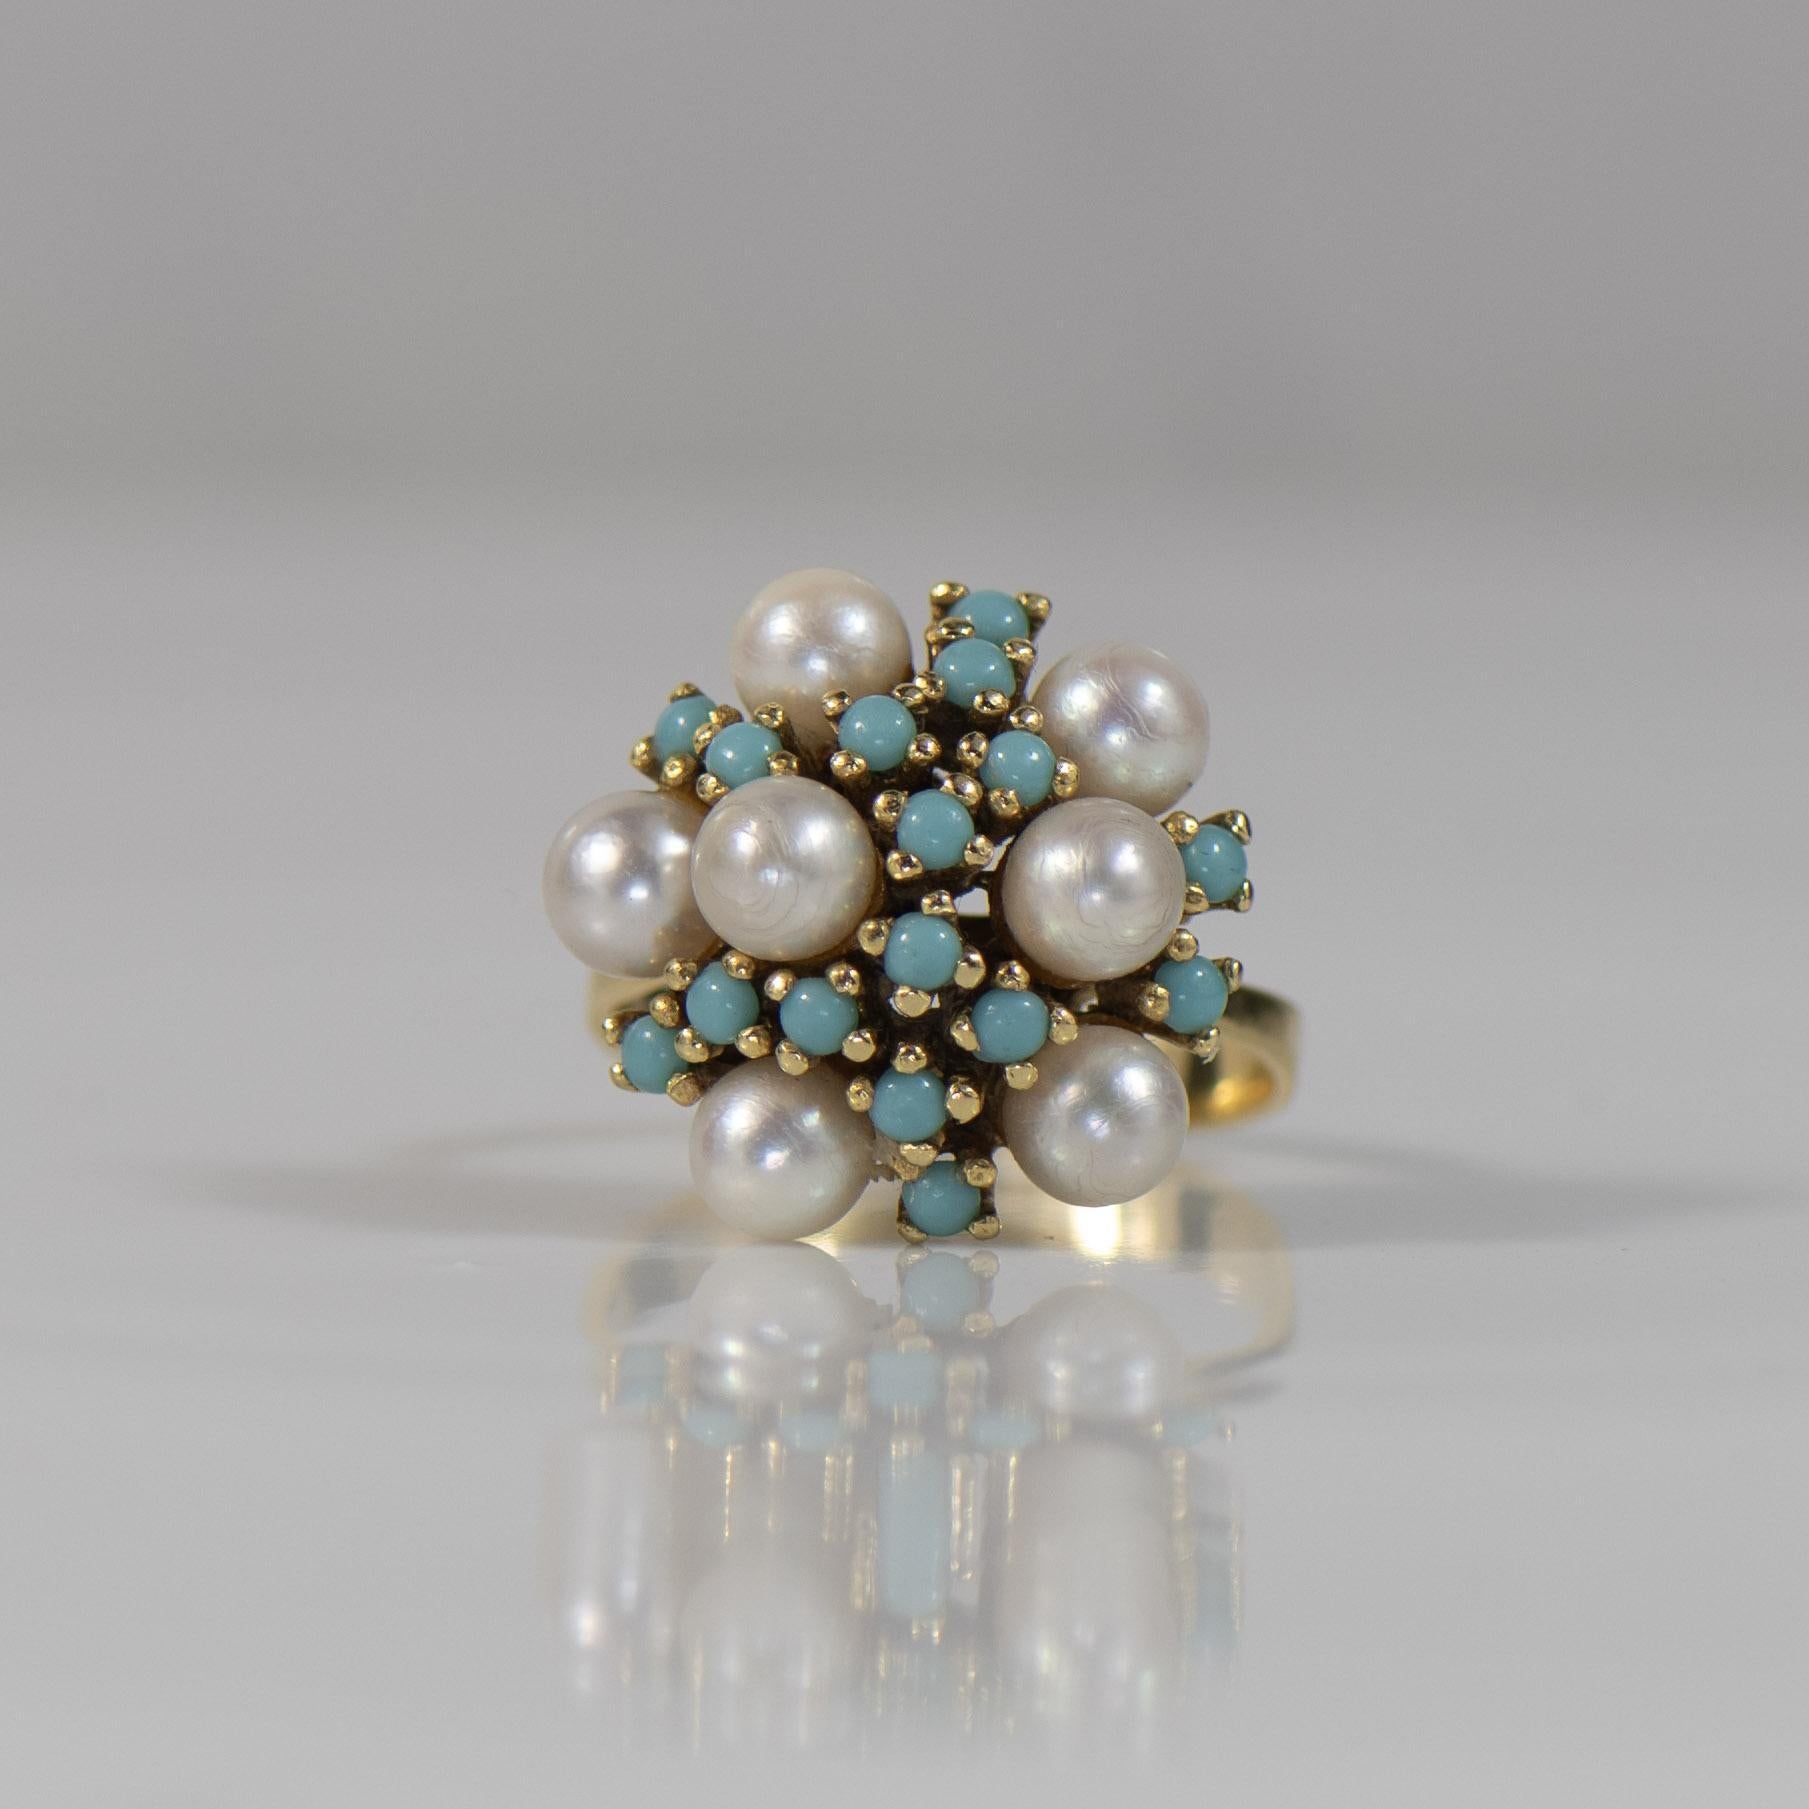 Transport yourself to a bygone era with this enchanting vintage Turquoise and Pearl Cluster Ring. The vibrant turquoise stones create a striking contrast against the lustrous pearls, forming a delicate cluster that evokes classic elegance. Set in a